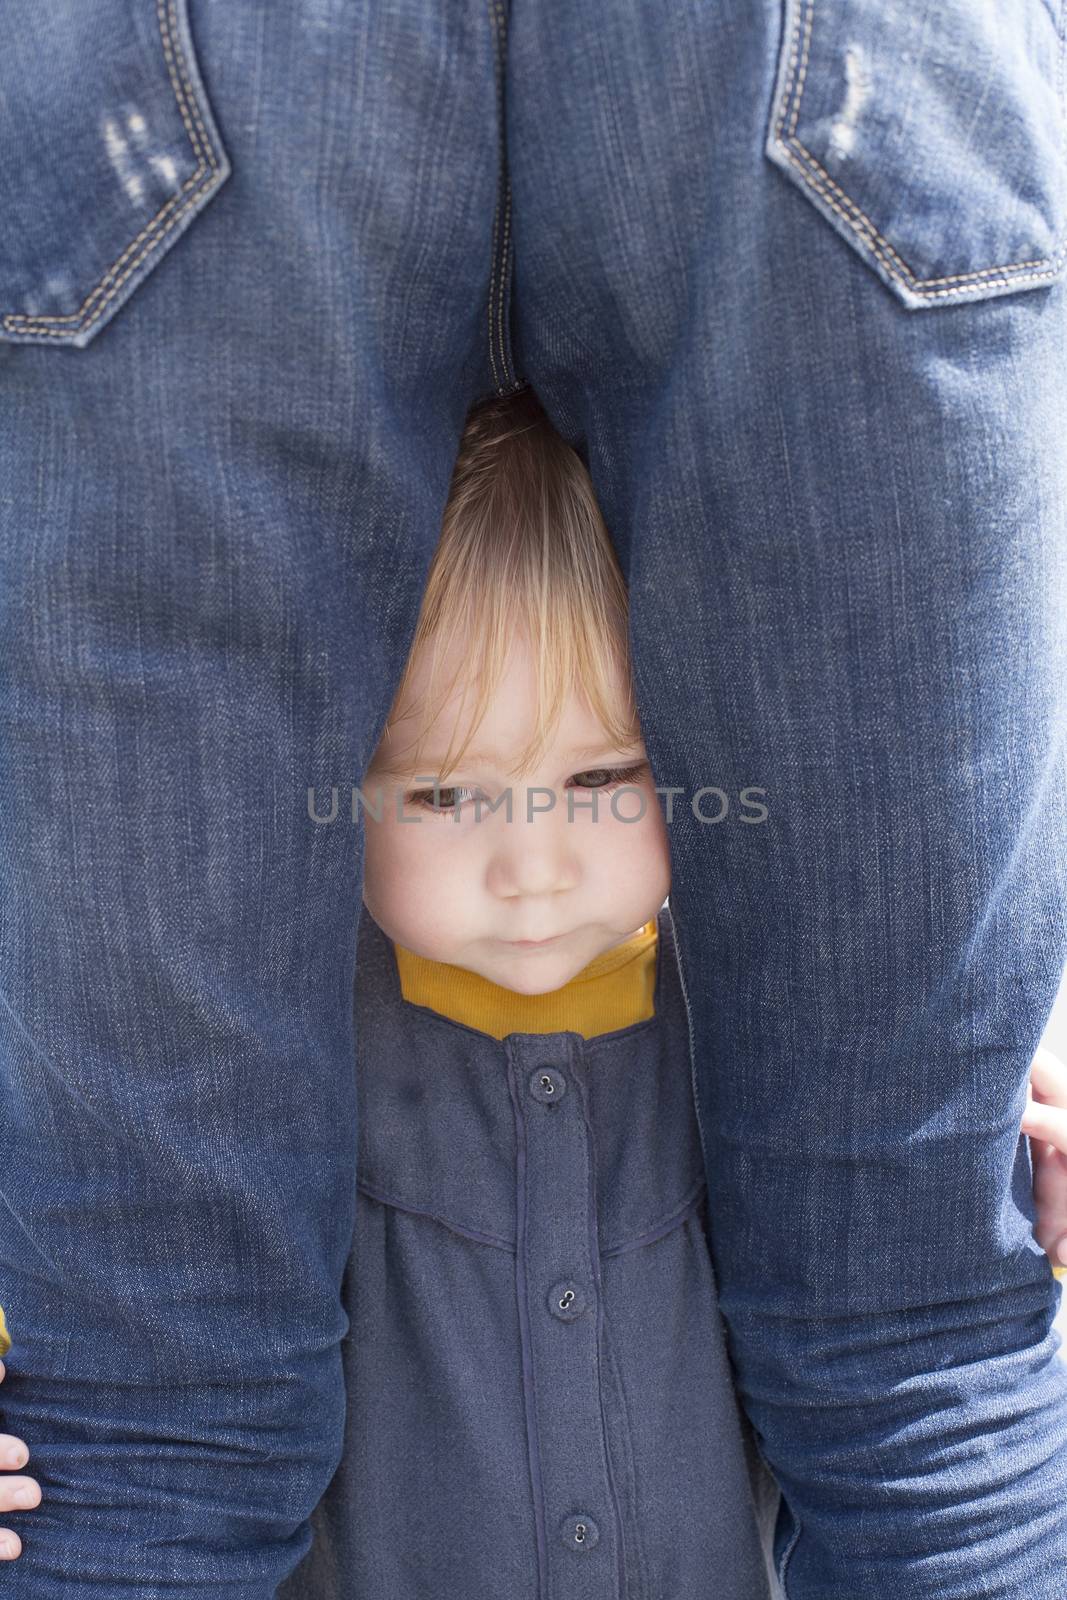 blonde nineteen month age baby with blue and yellow dress between mother blue jeans back woman legs